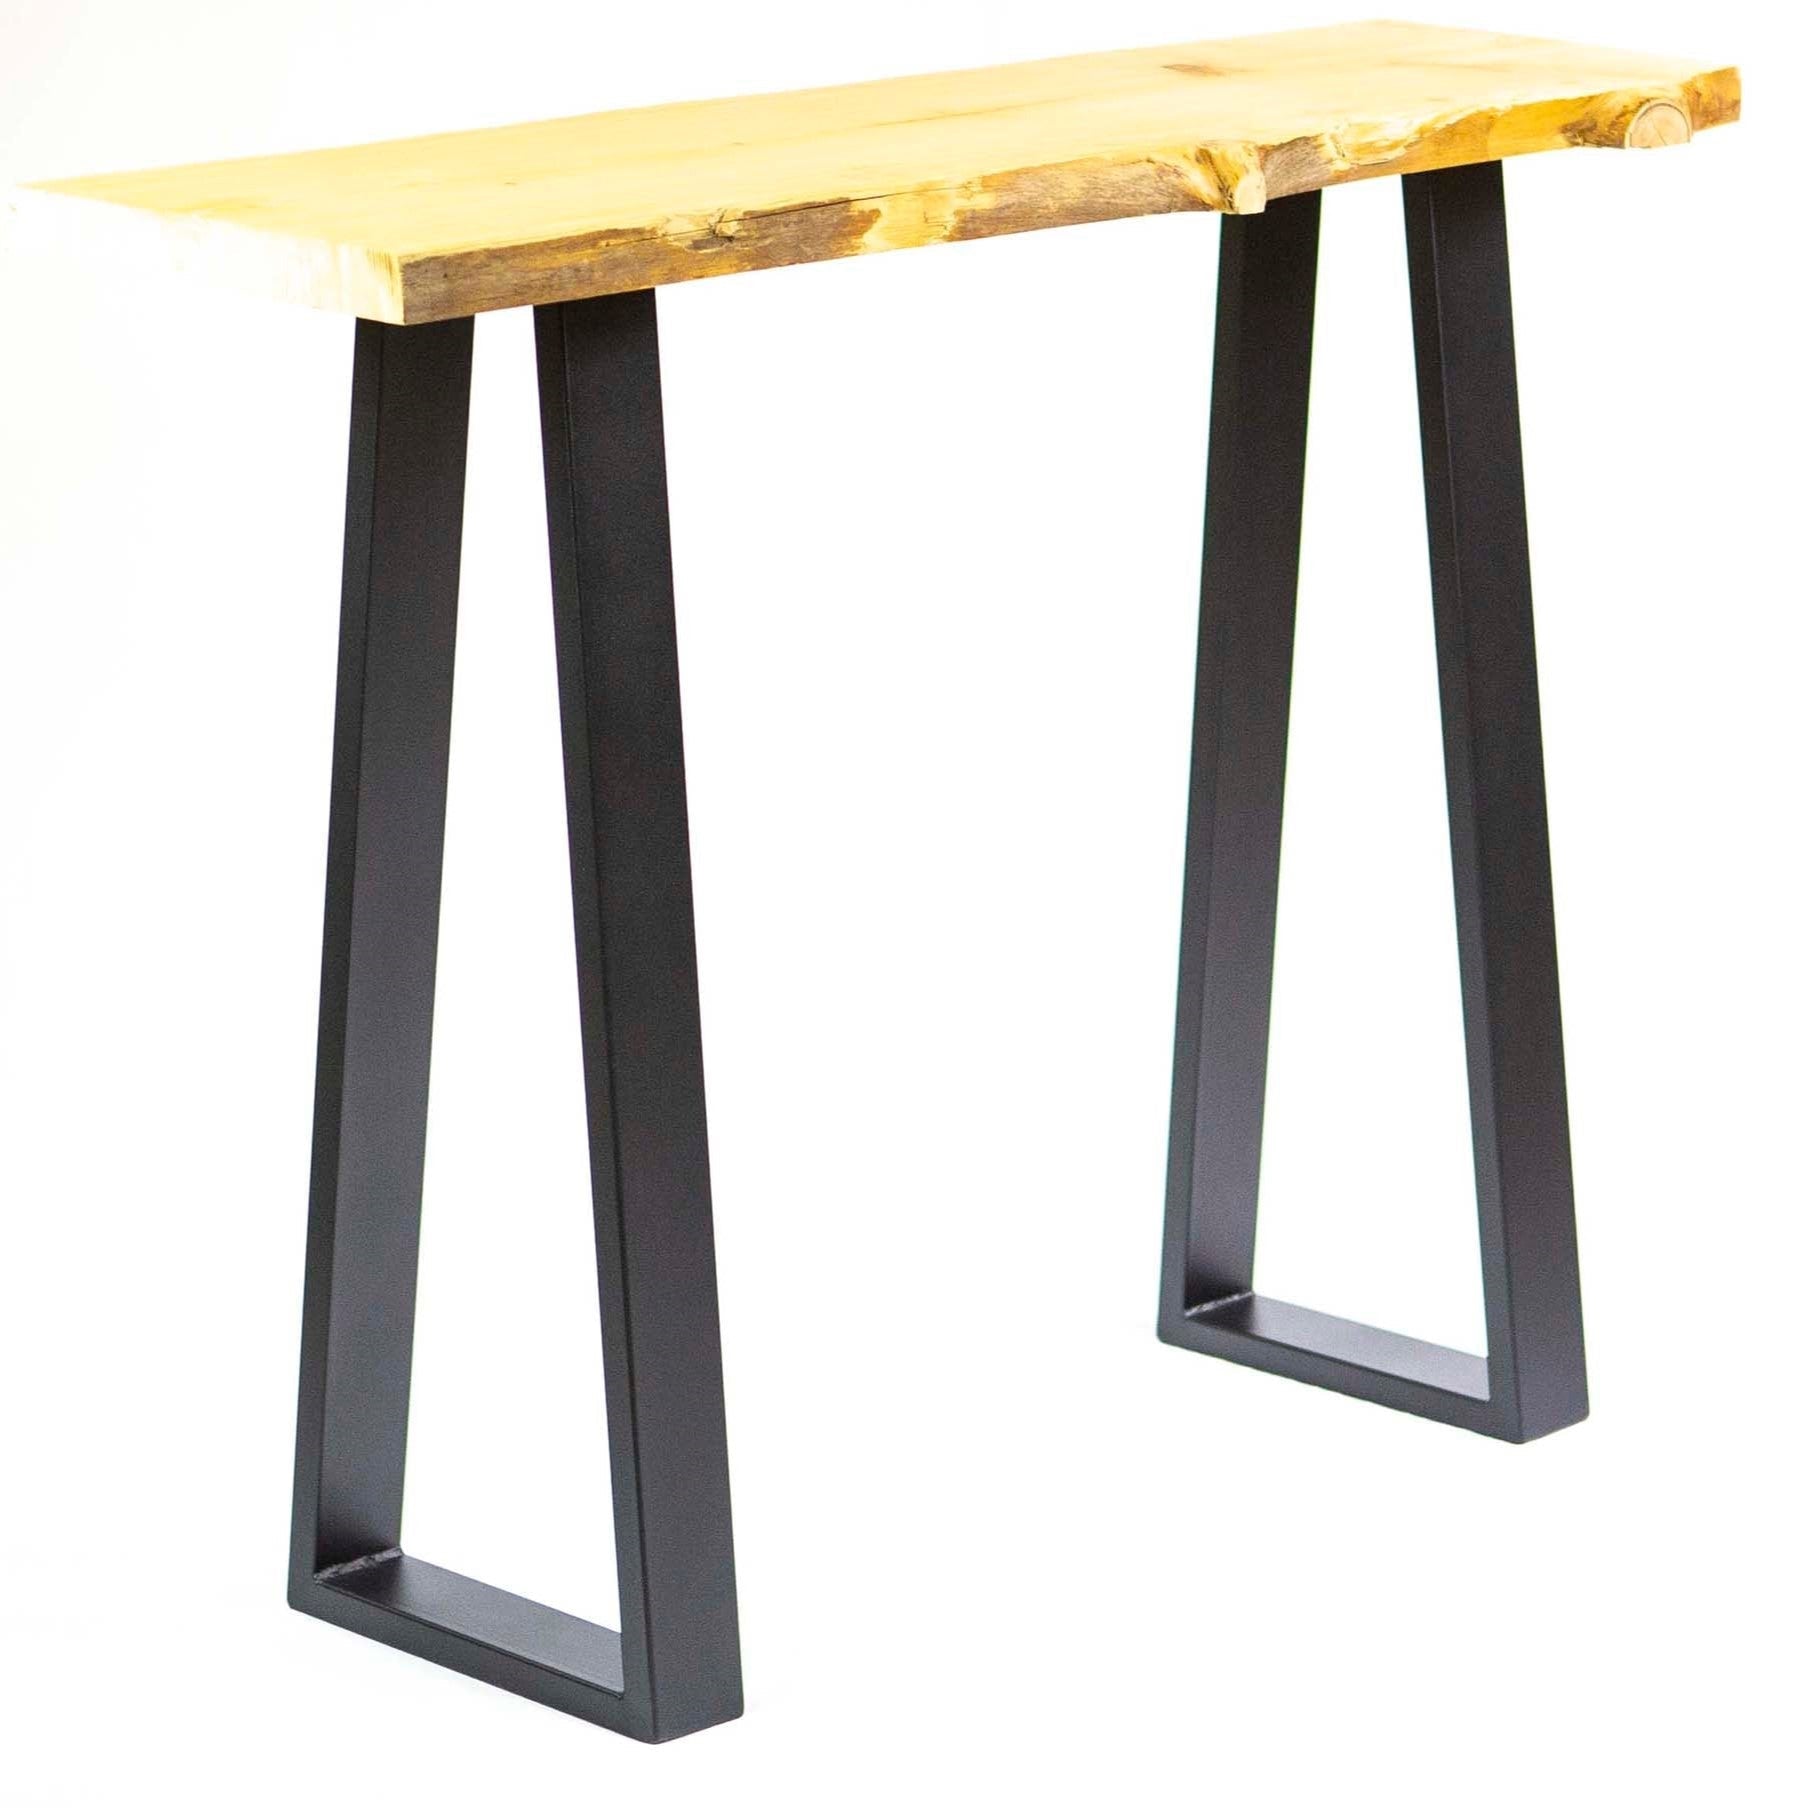 SS270 Trapezoid Counter Height Table Legs, 86cm Height, Black Powder Coated, 1 Pair